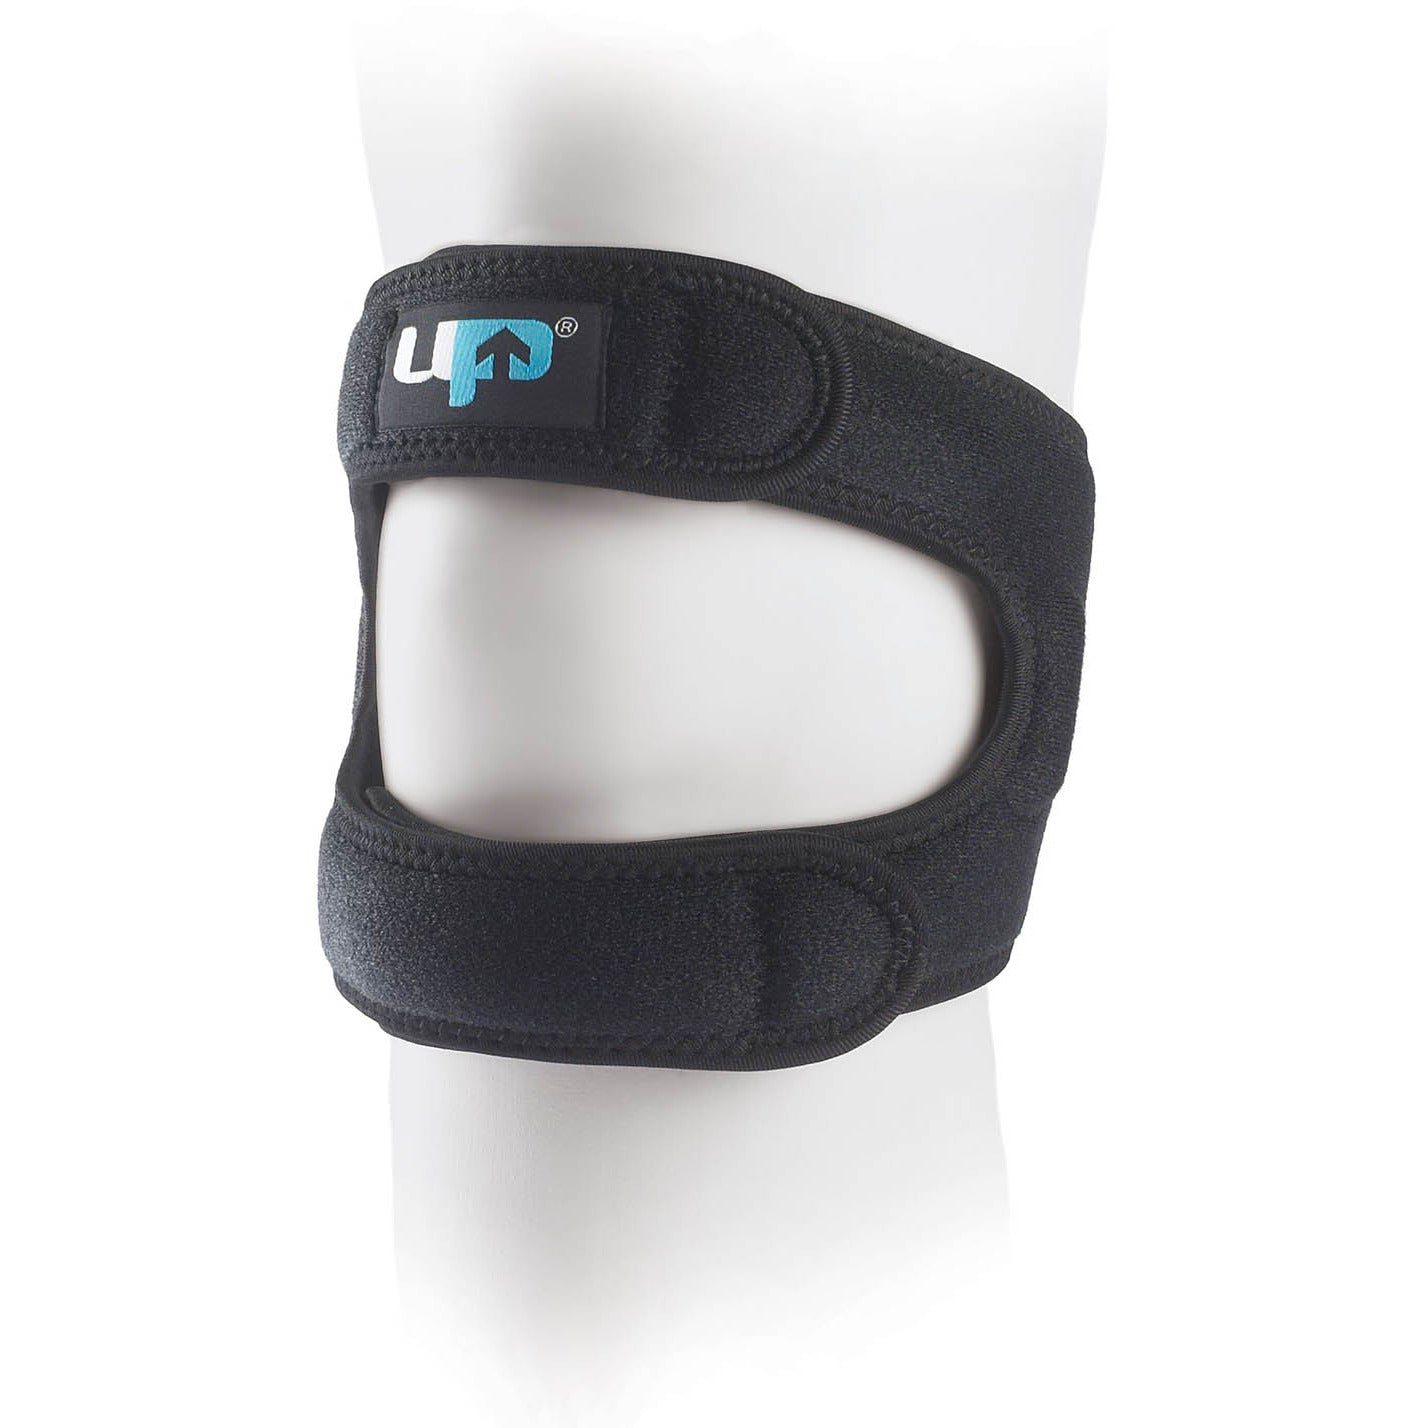 Ultimate Runner’s Knee Strap - One size fits all